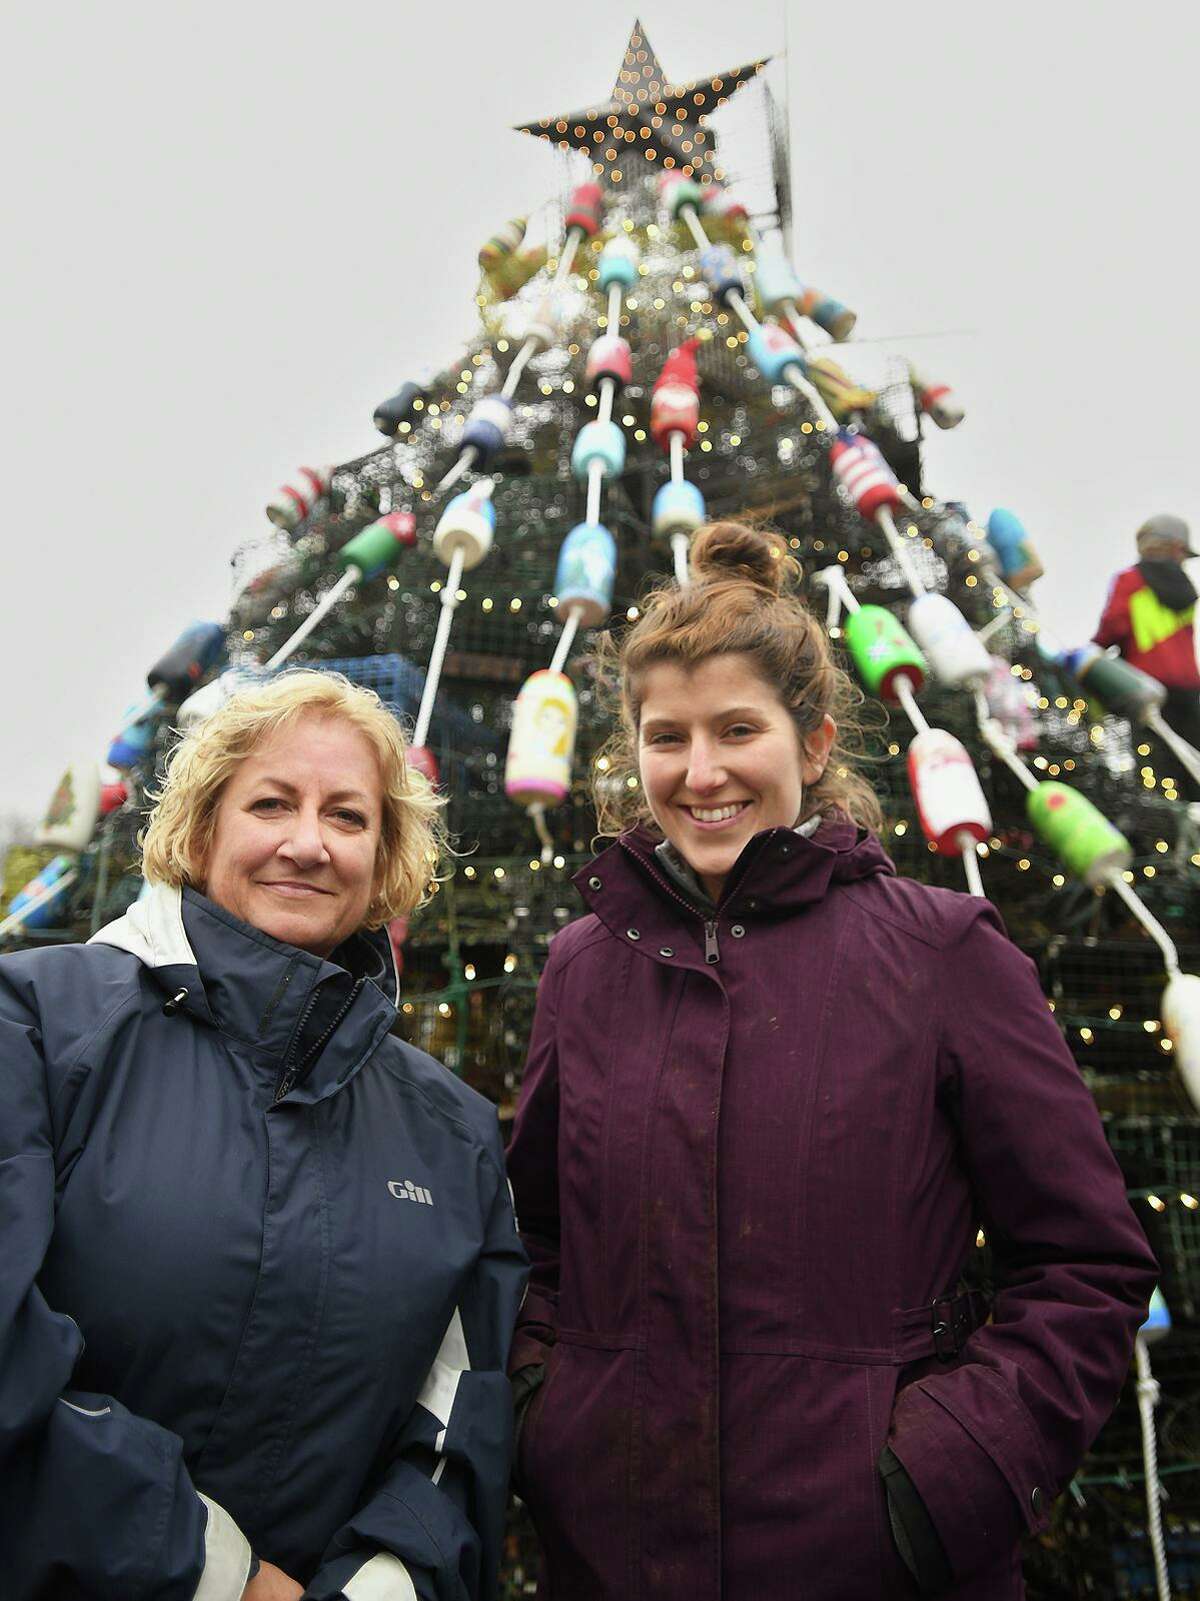 Milford Arts Council Executive Director Paige Miglio, left, and Downtown Milford Executive Director Makayla Silva at the groups' first ever lobster trap tree at Lisman Landing in Milford, Conn. on Saturday, December 11, 2021.